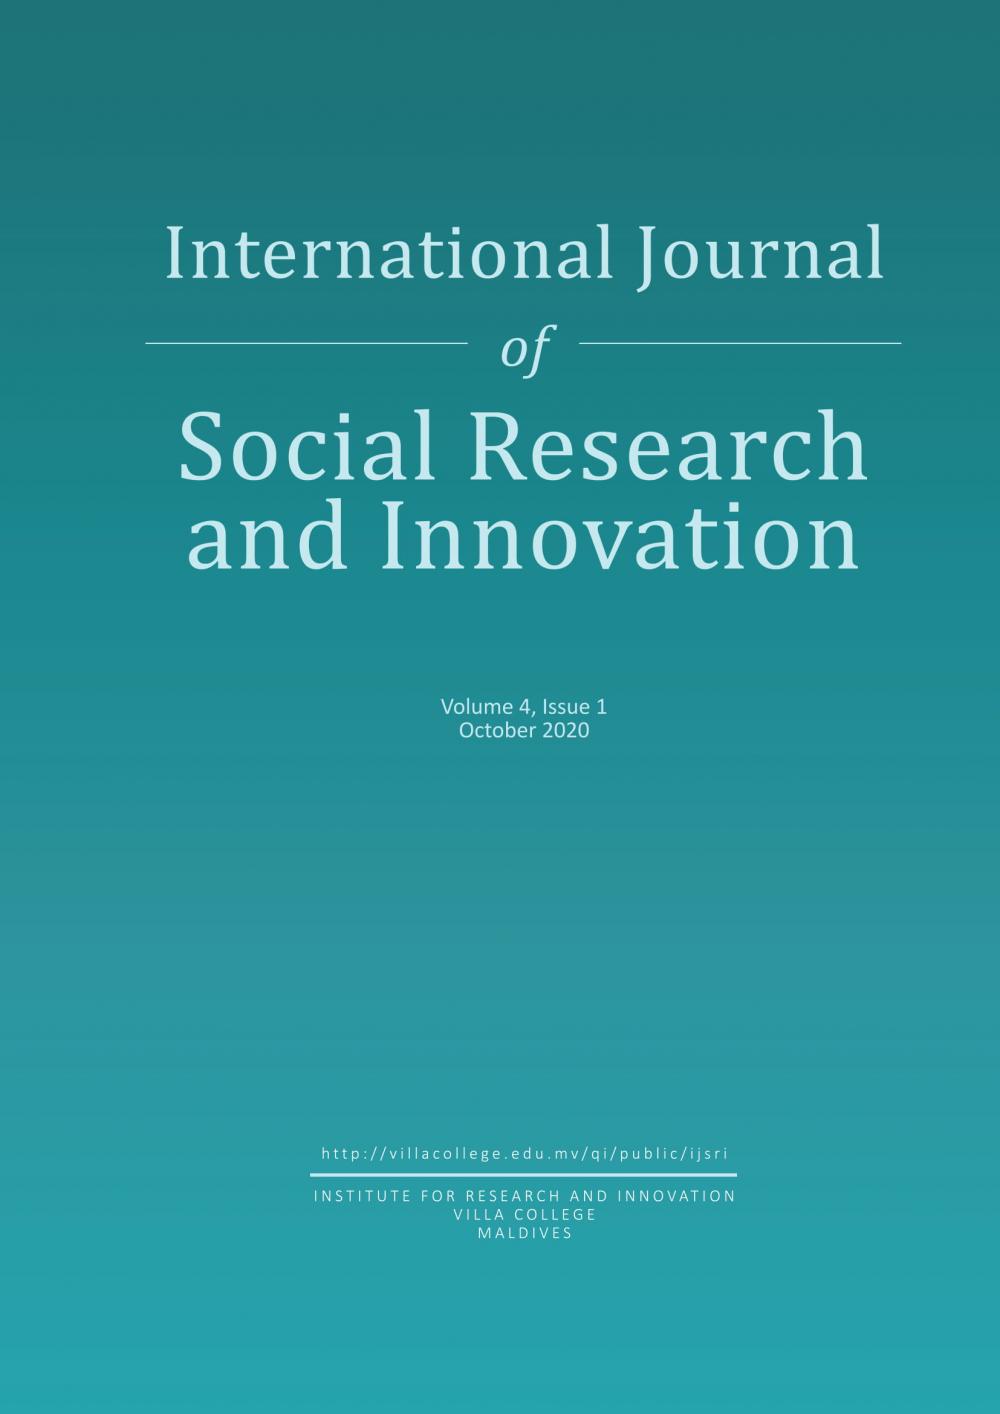 					View Vol. 4 No. 1 (2020): International Journal of Social Research and Innovation
				